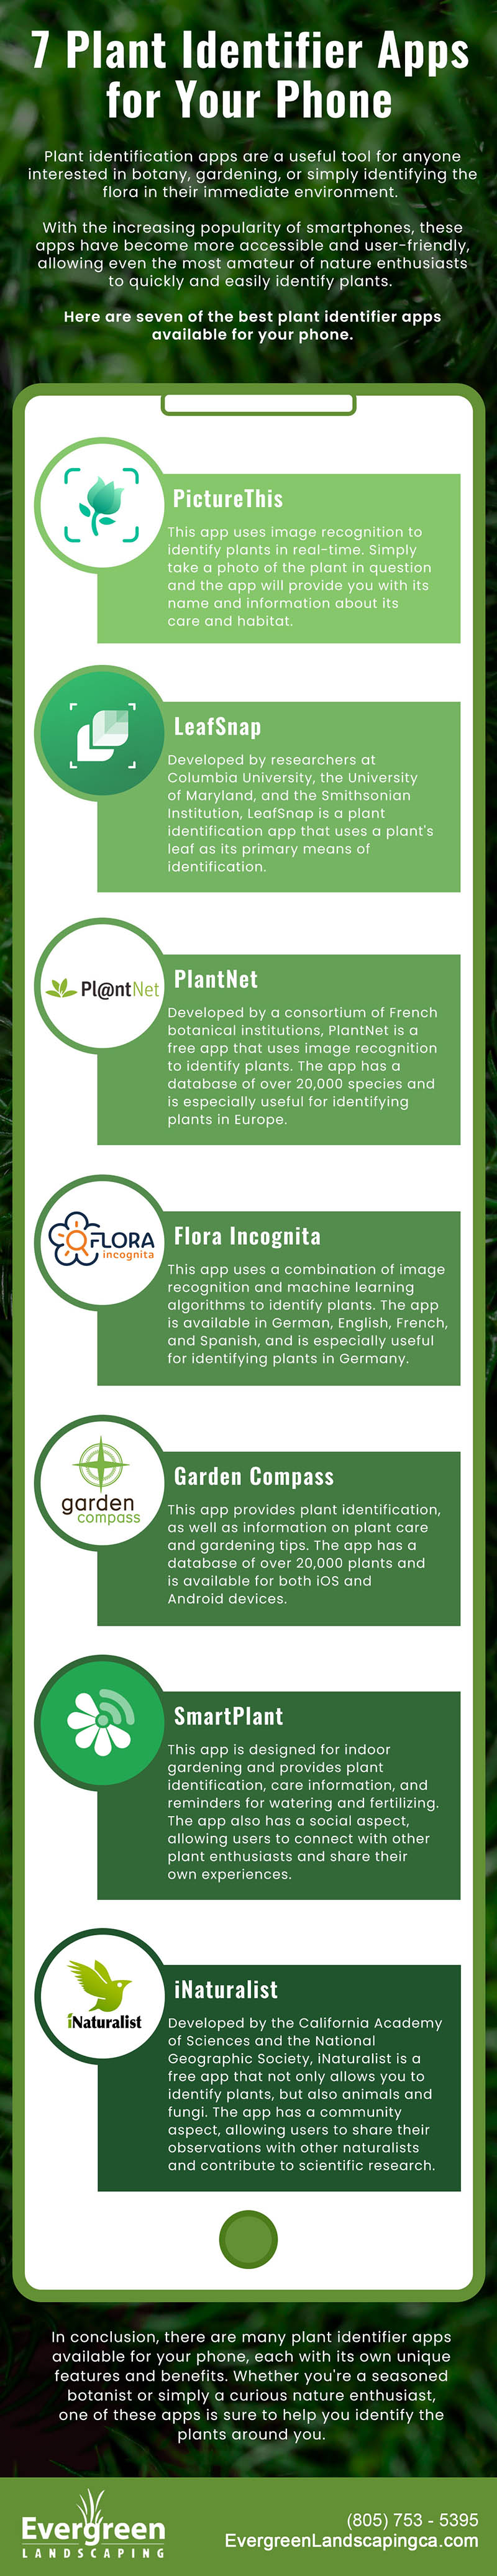 7 plant identifier apps for your phone